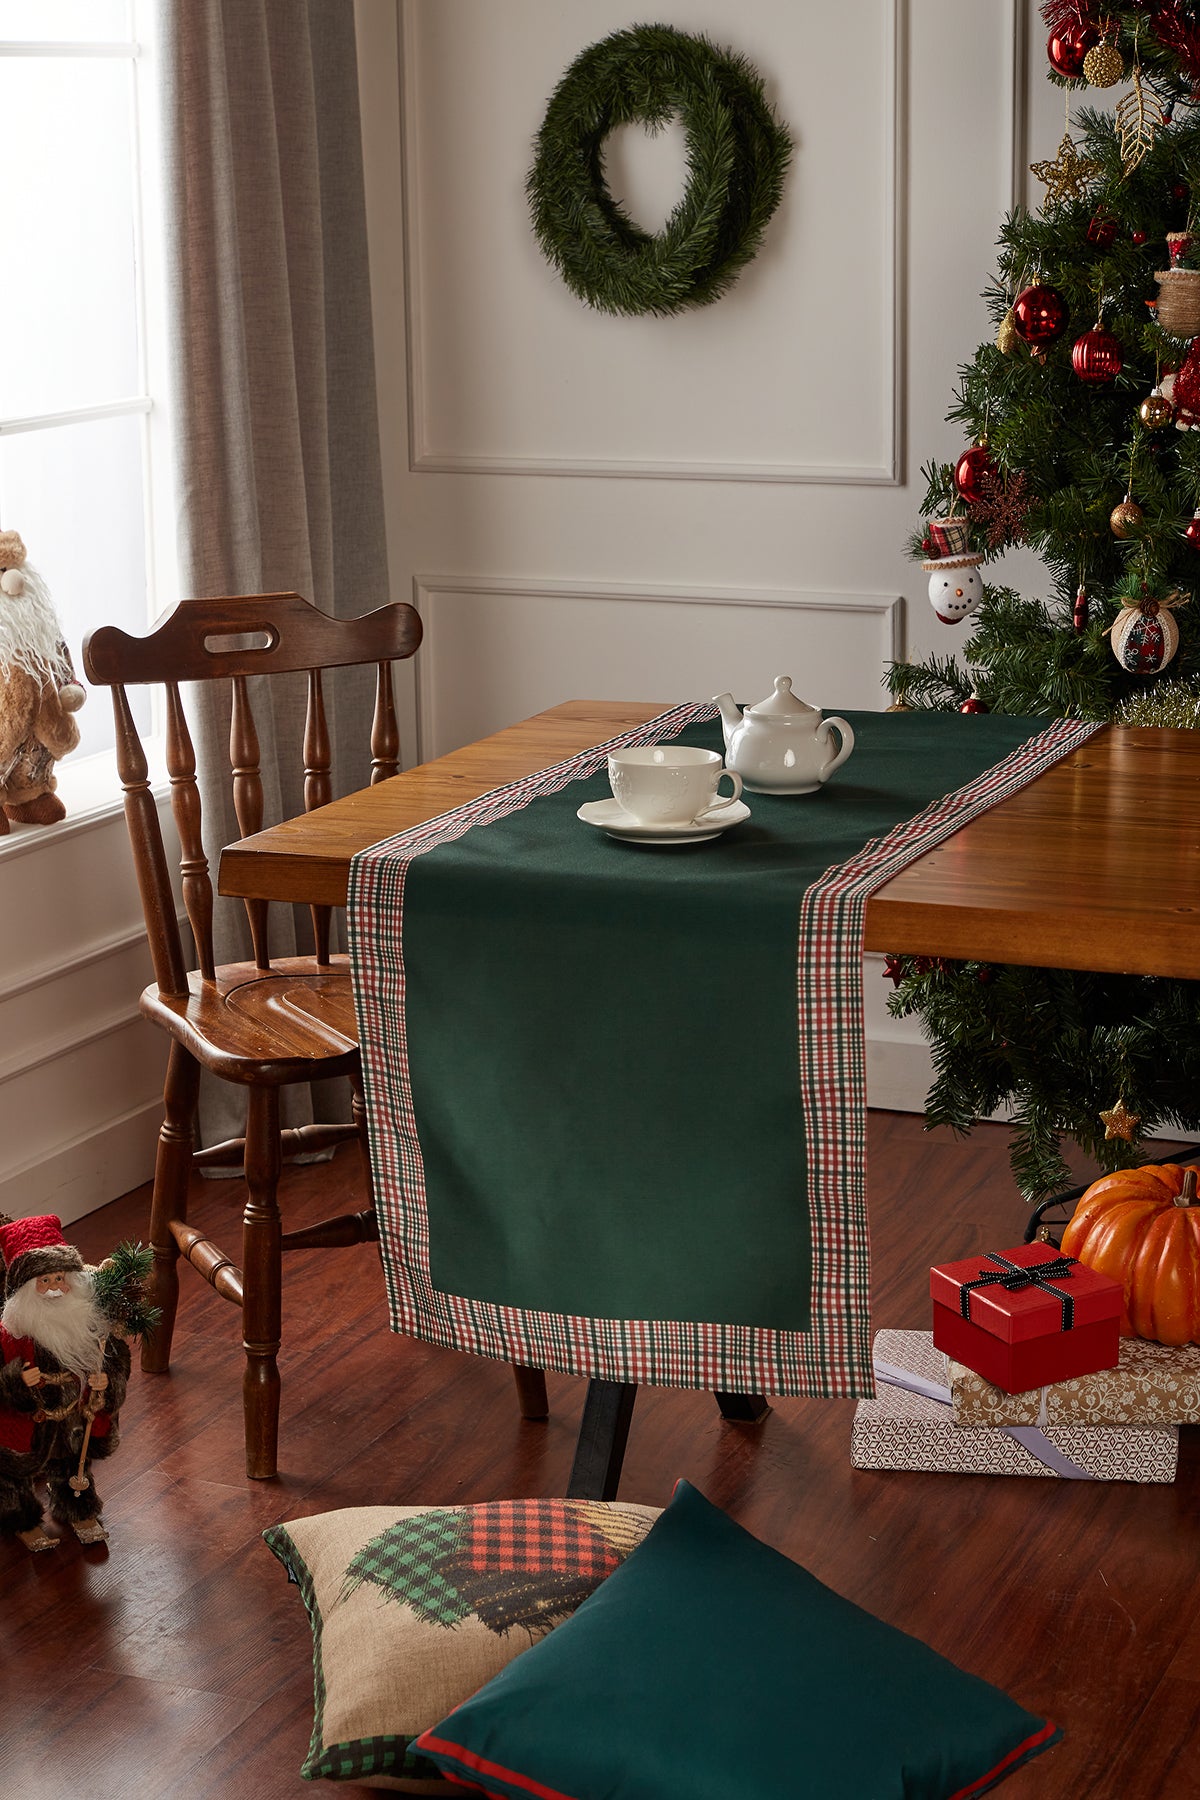 Hunter Green and Red Runner with Plaid Border, Holiday Decor - Wear Sierra